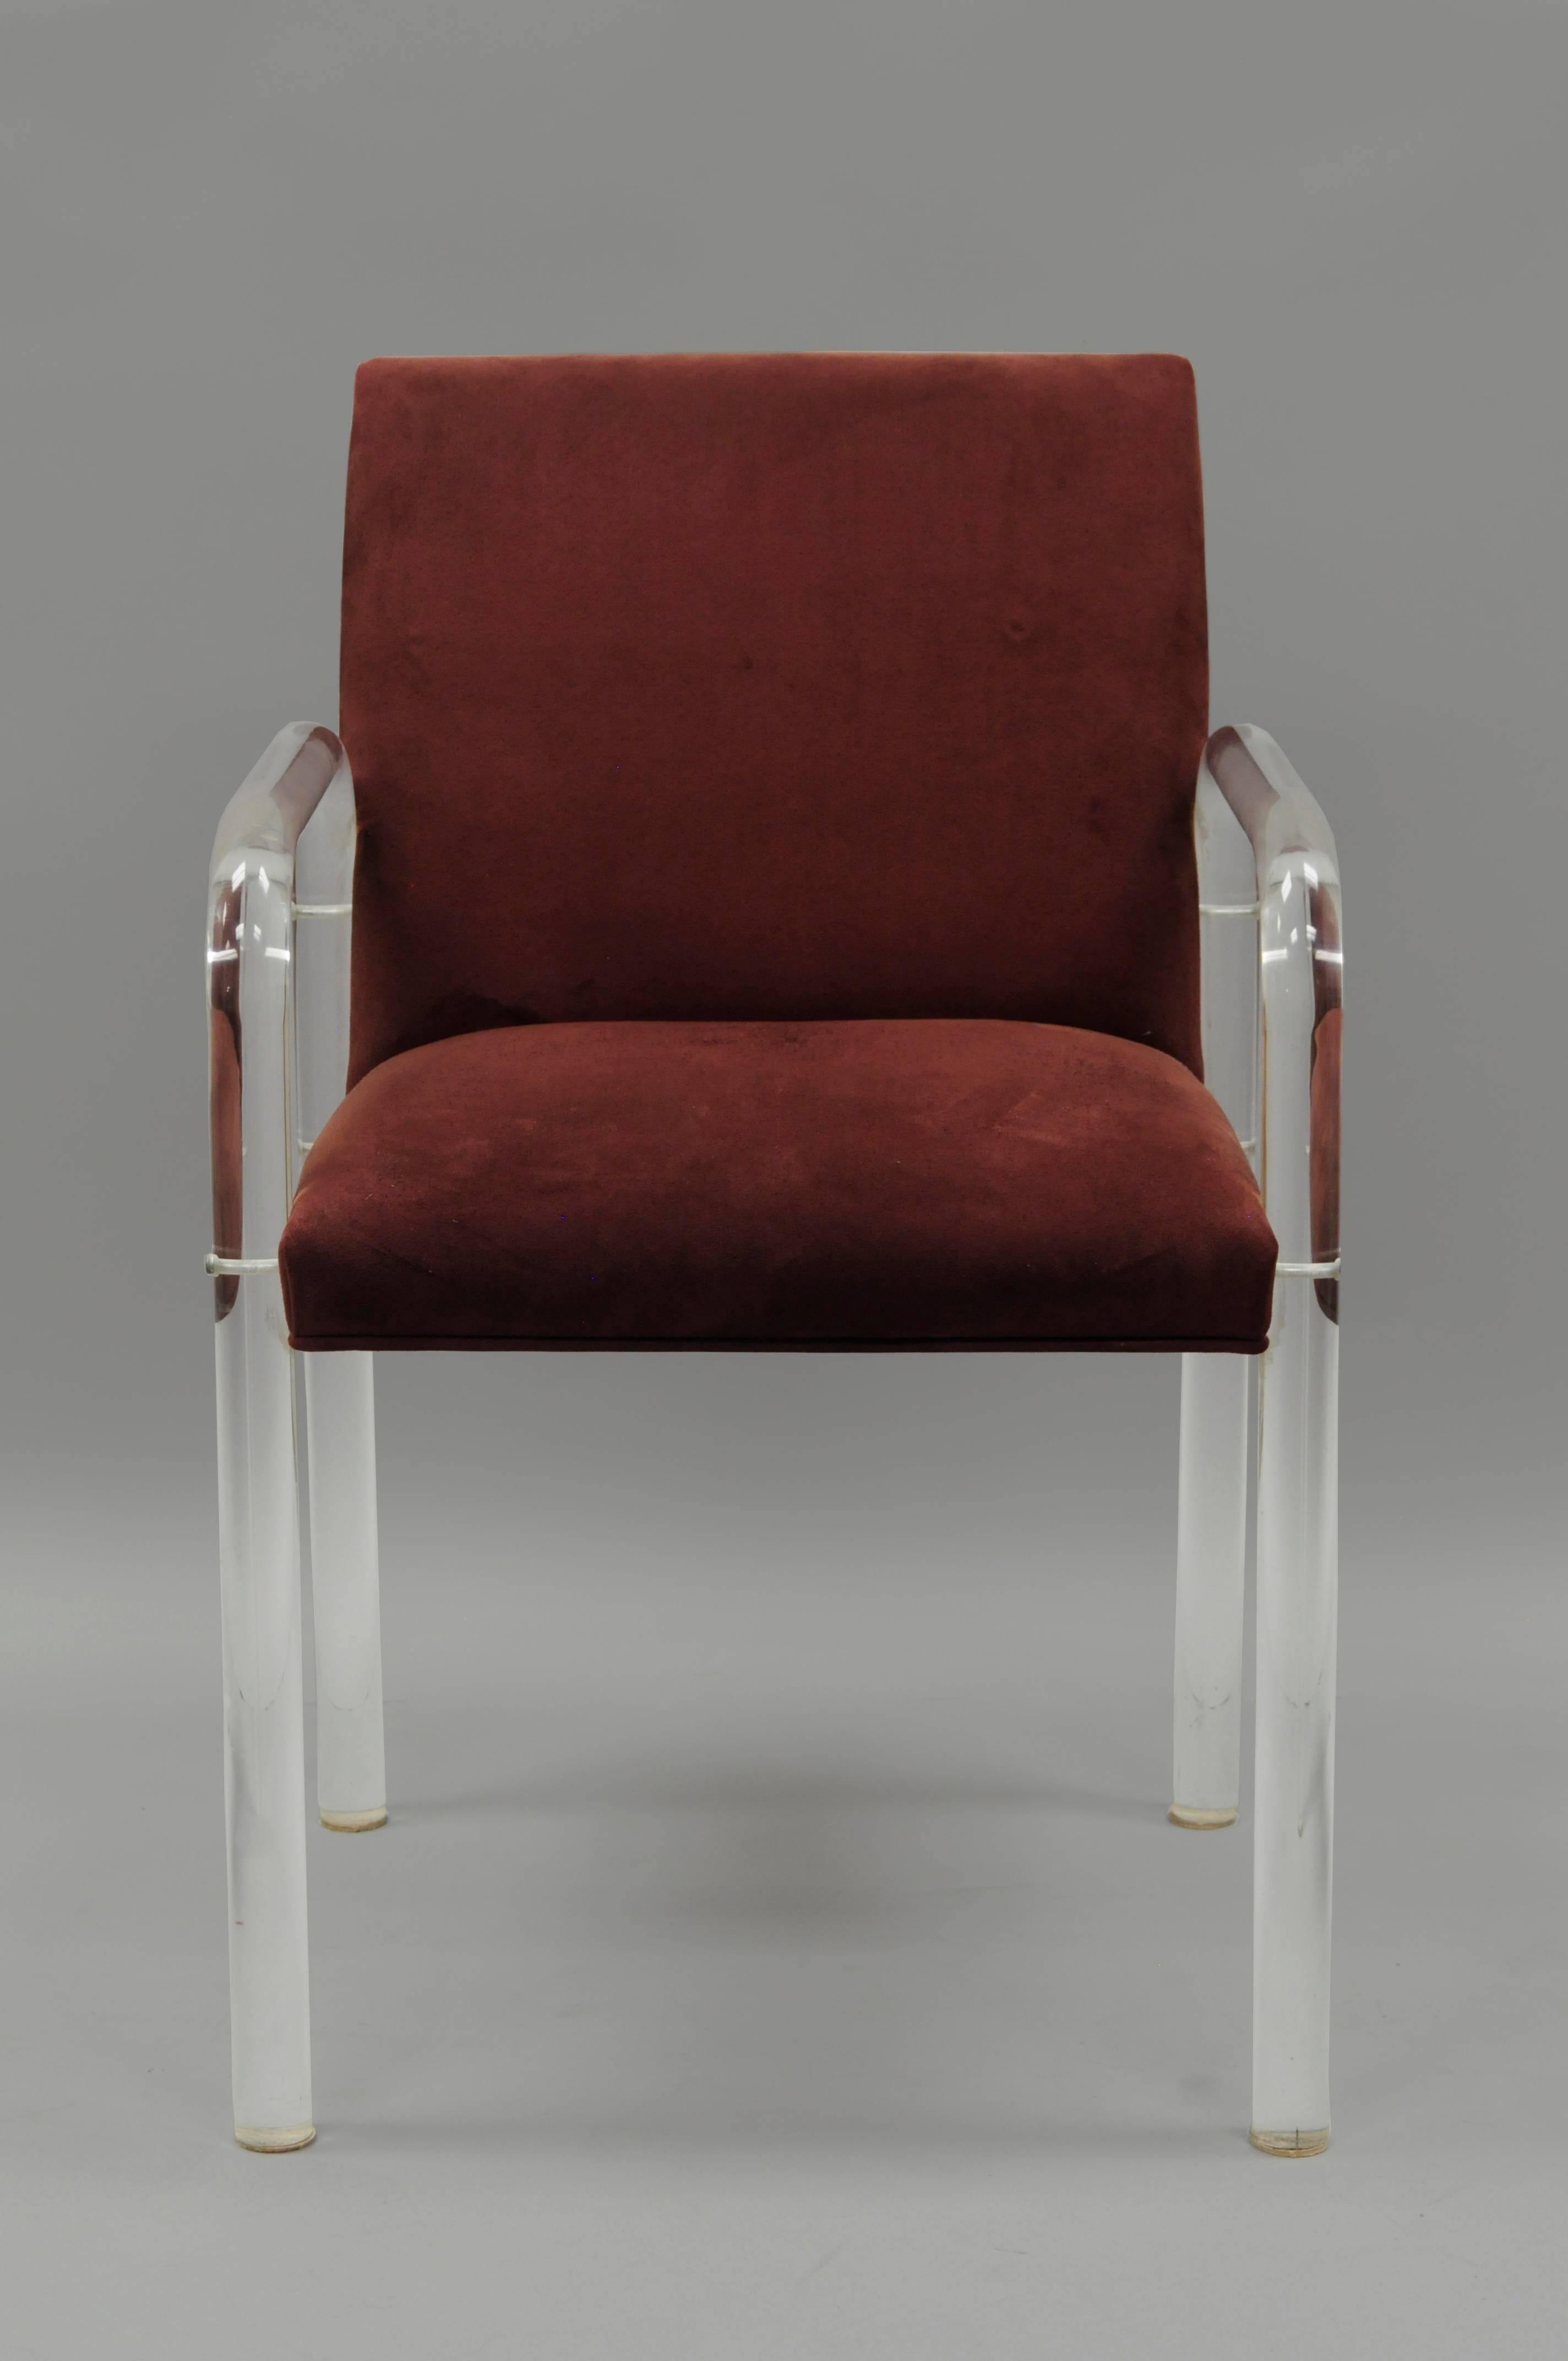 Vintage Mid-Century Modern / Hollywood Regency curved Lucite armchair after Charles Hollis Jones. Item features clean modernist lines with a simple clear Lucite frame and upholstered back and seat. Measure: 25